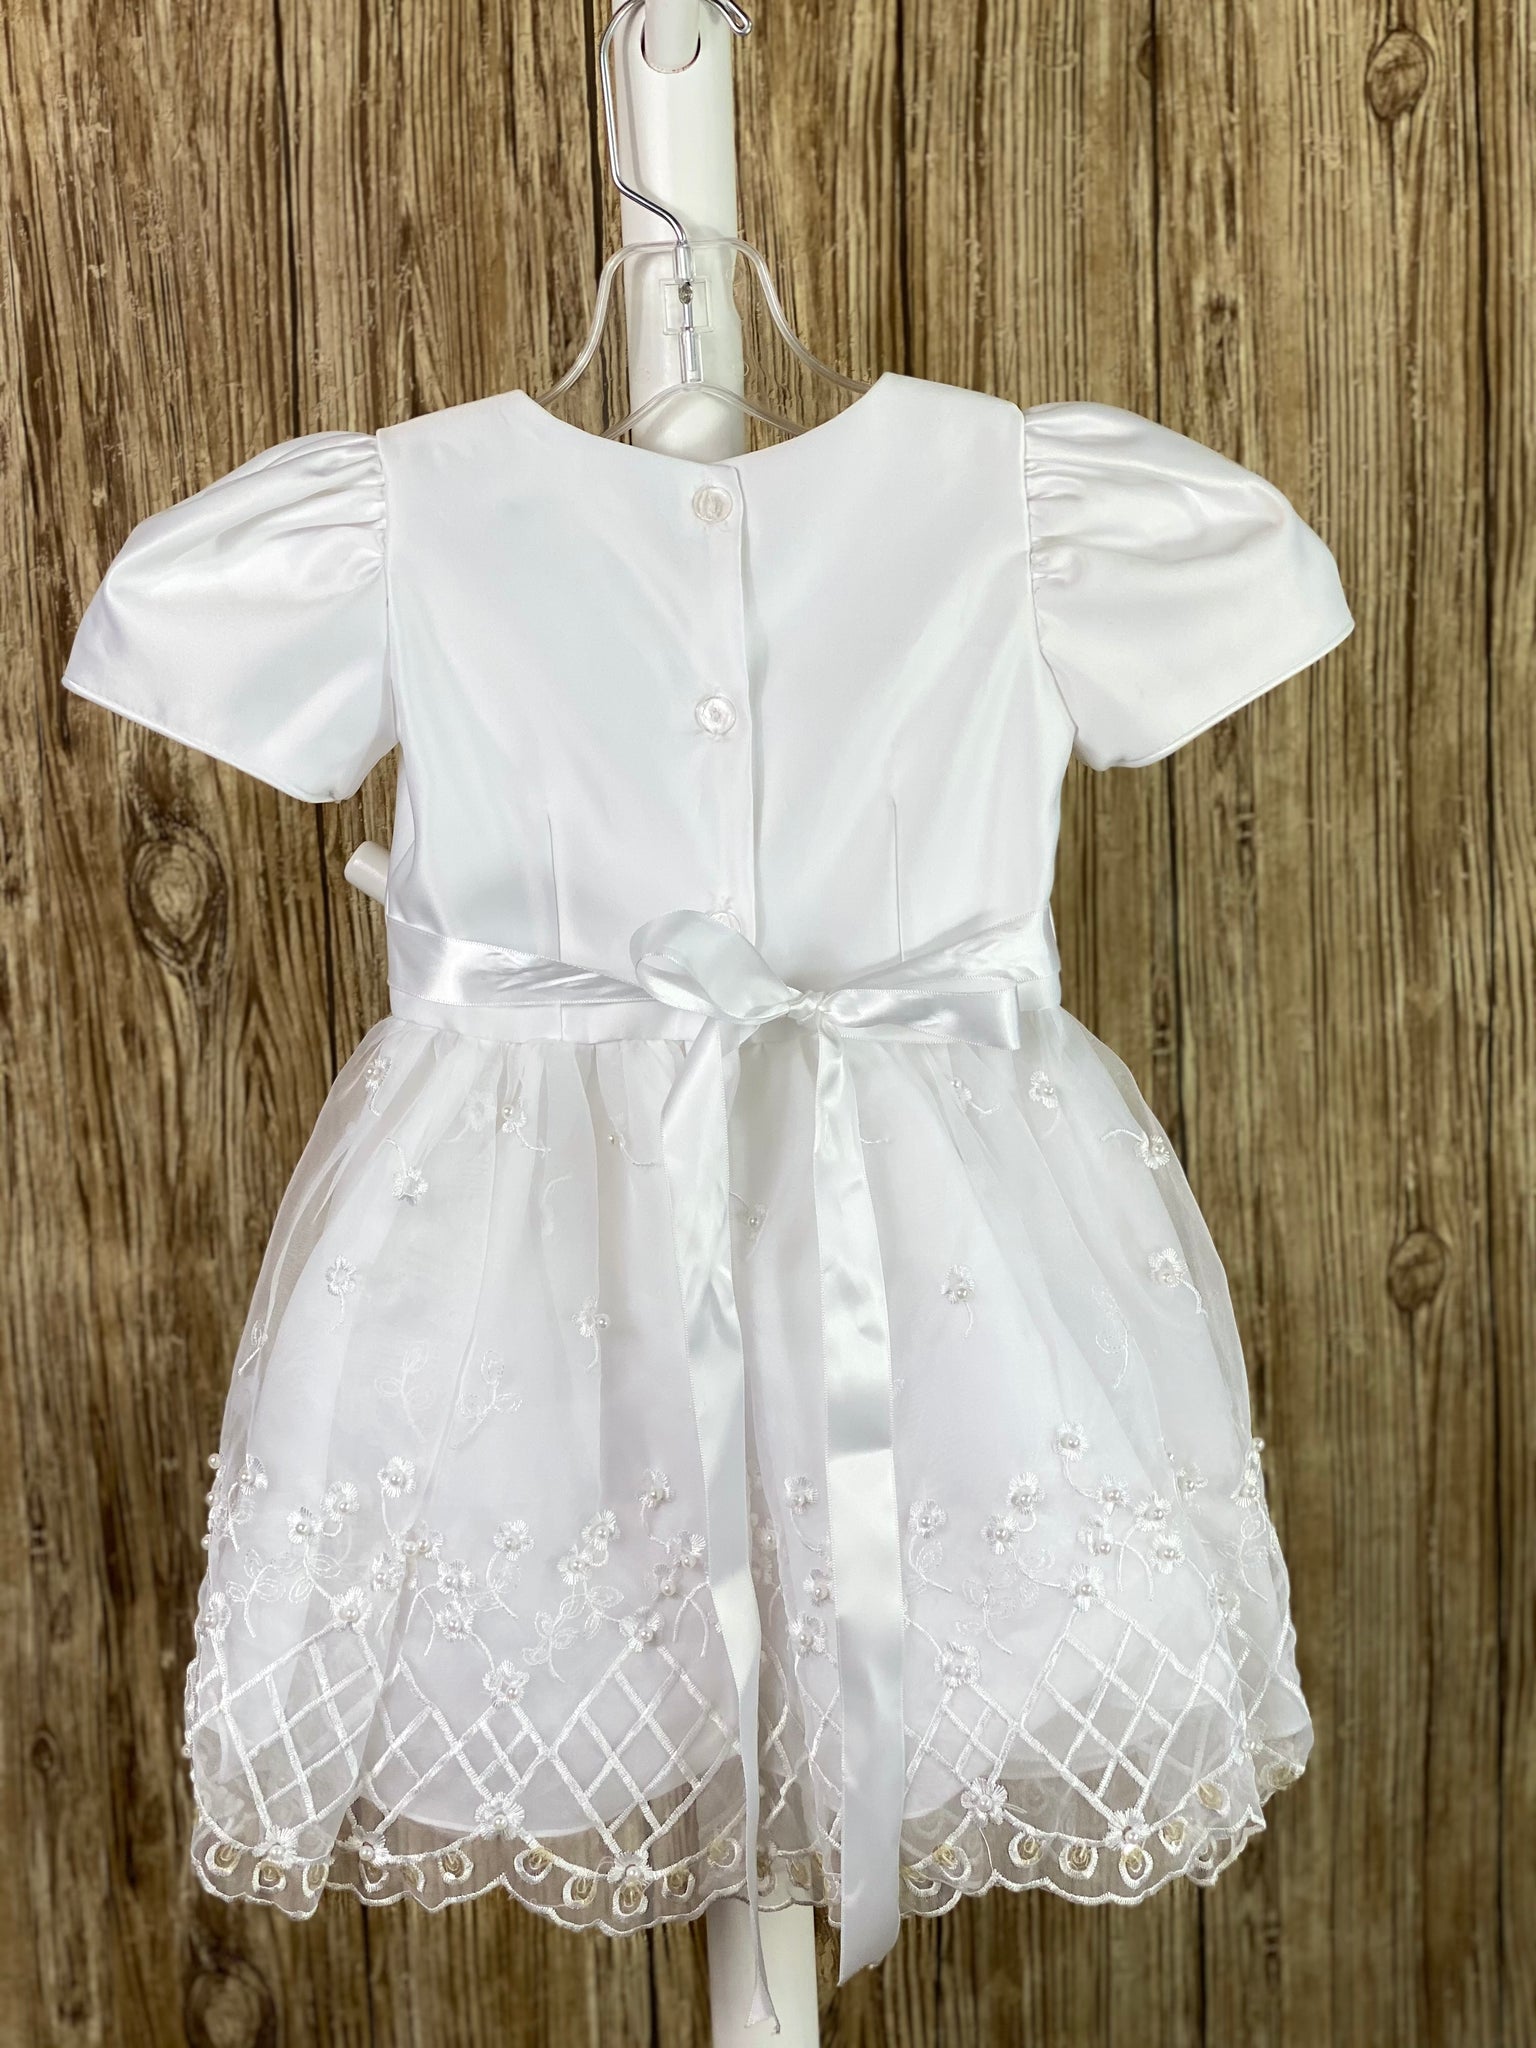 This a beautiful, one-of-a-kind baptism gown.  A lovely gown for a precious child.  White, size 12M Simple satin bodice Satin gathered sleeves Bow in center of bodice Satin skirt with harlequin floral lace Ribbon bow in back Lace vest  Feathered trim on vest Bows on right and left side of vest